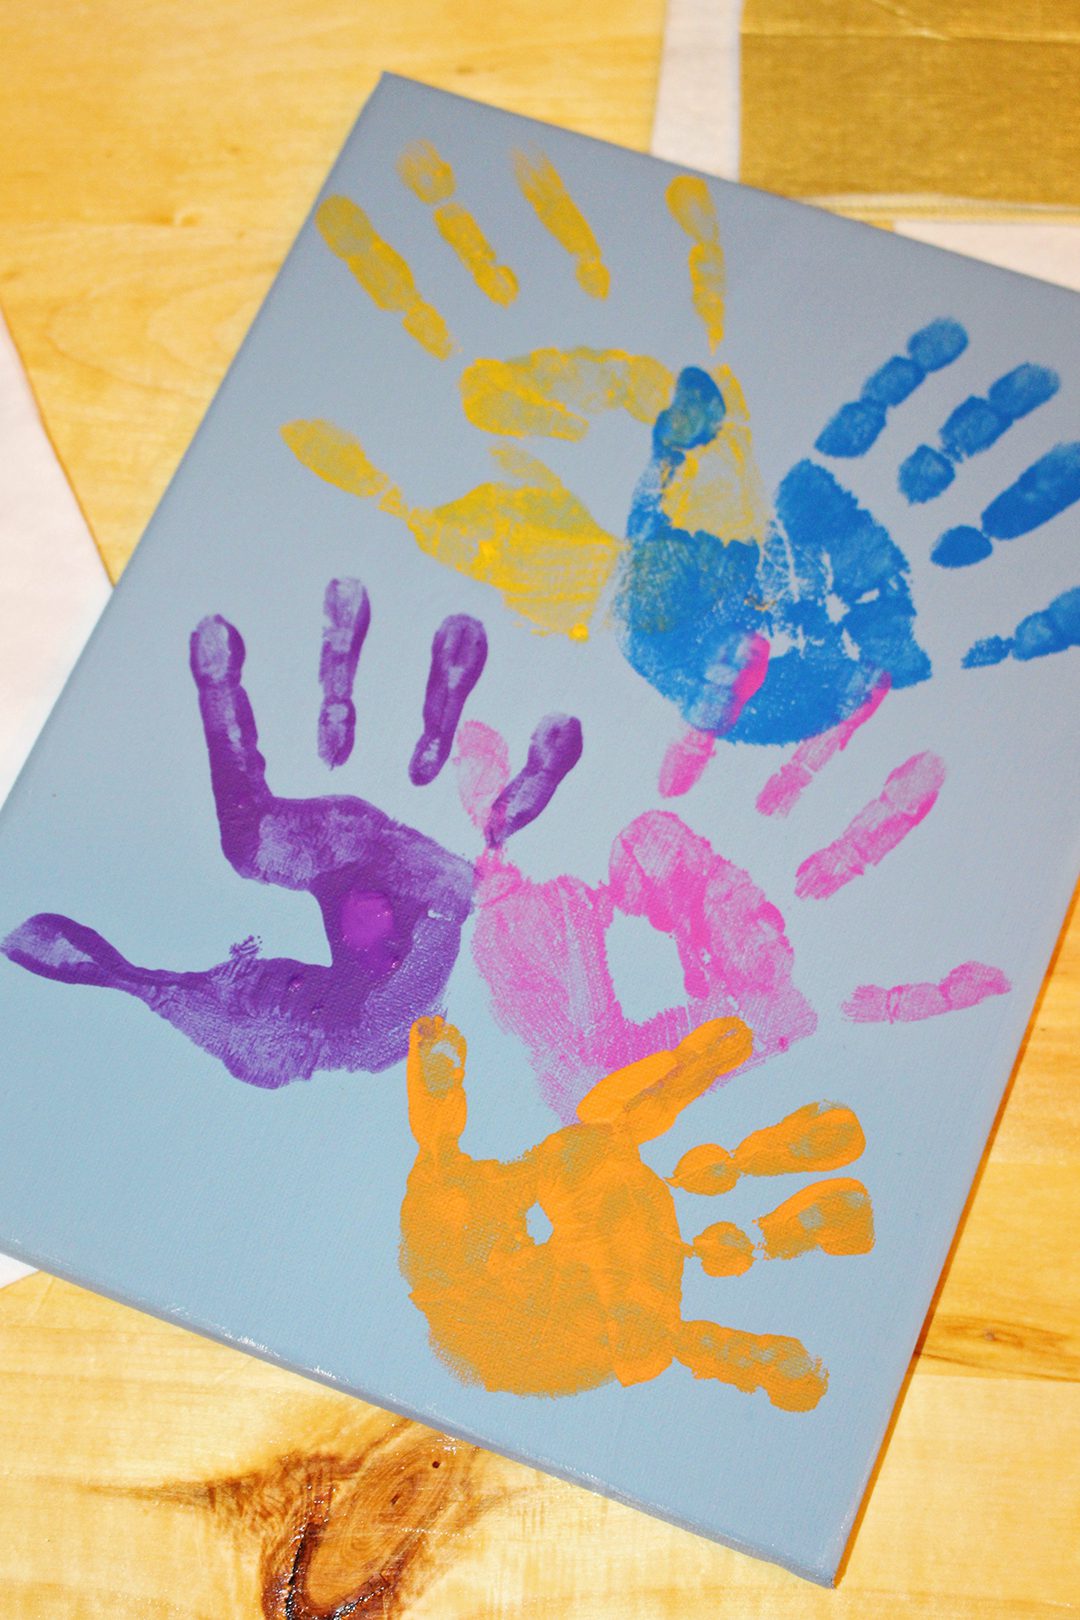 Colorful painted children's handprints on a canvas.